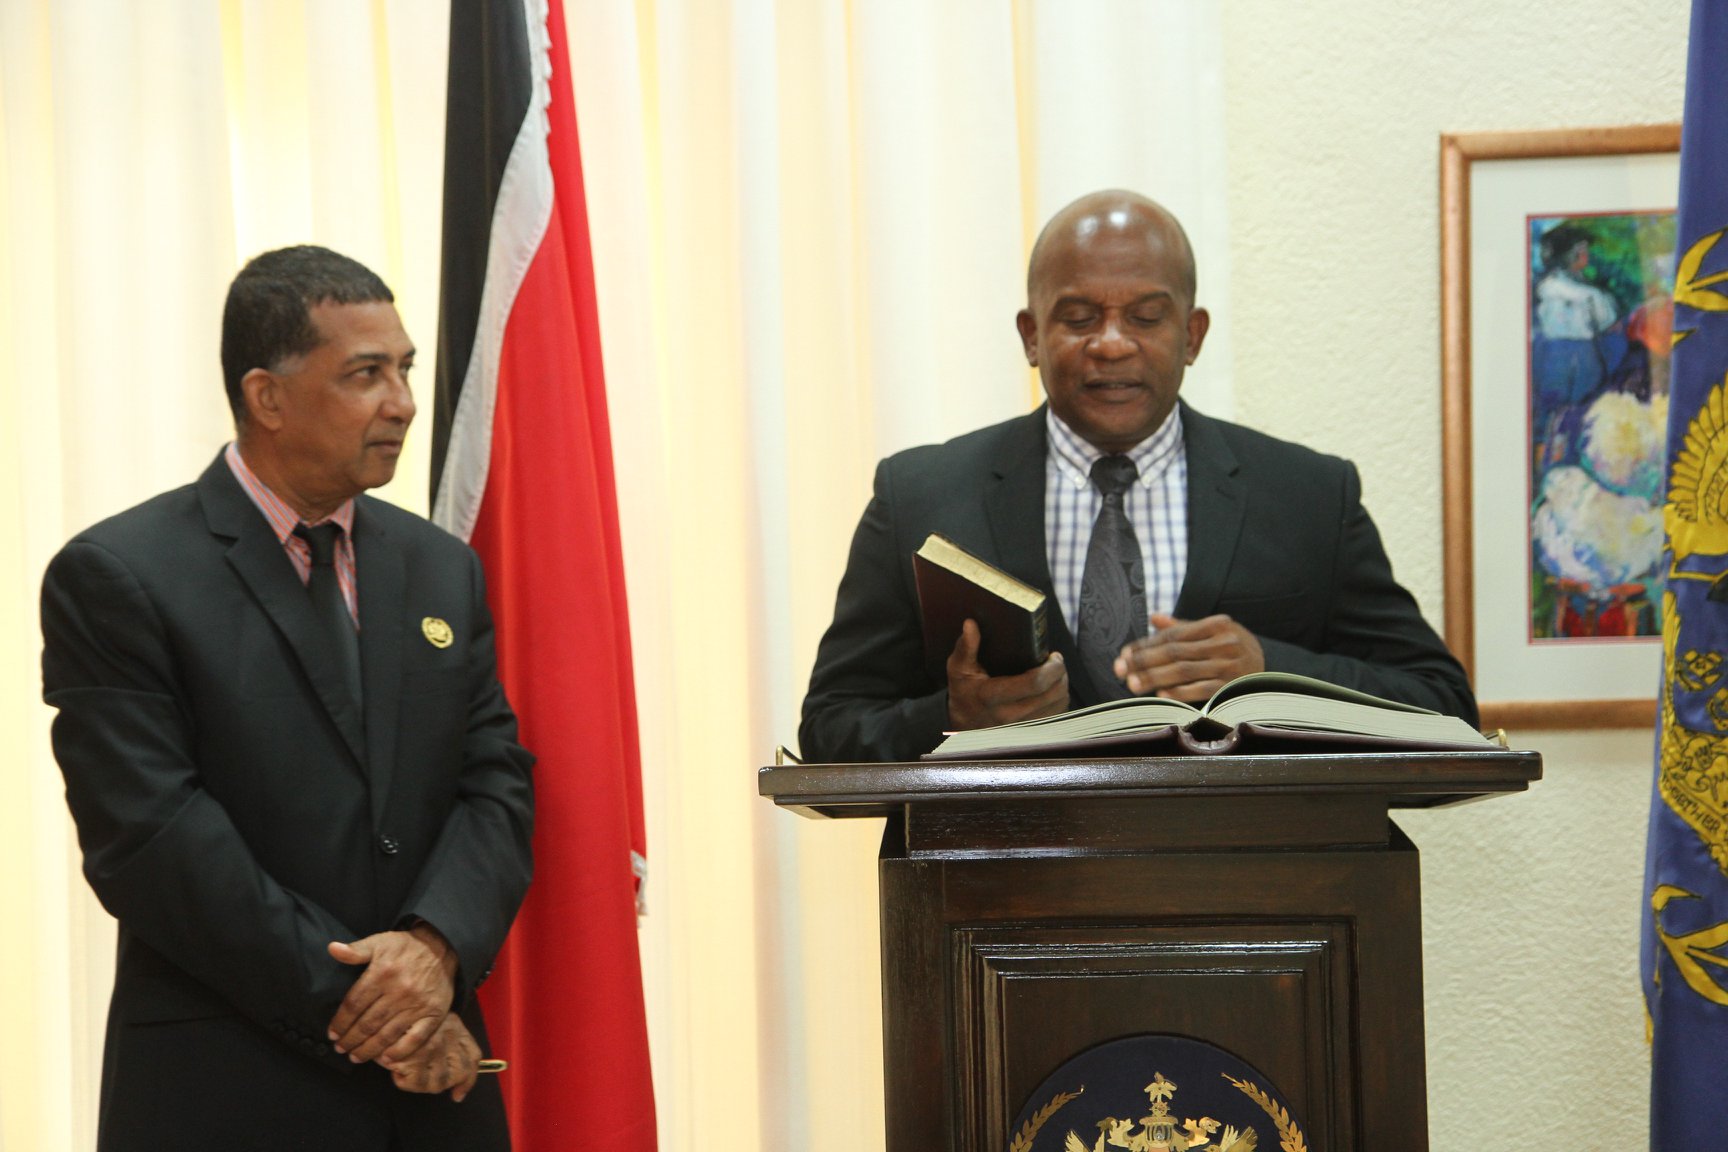 Appointment of Commissioners of the Port Authority of Trinidad and Tobago